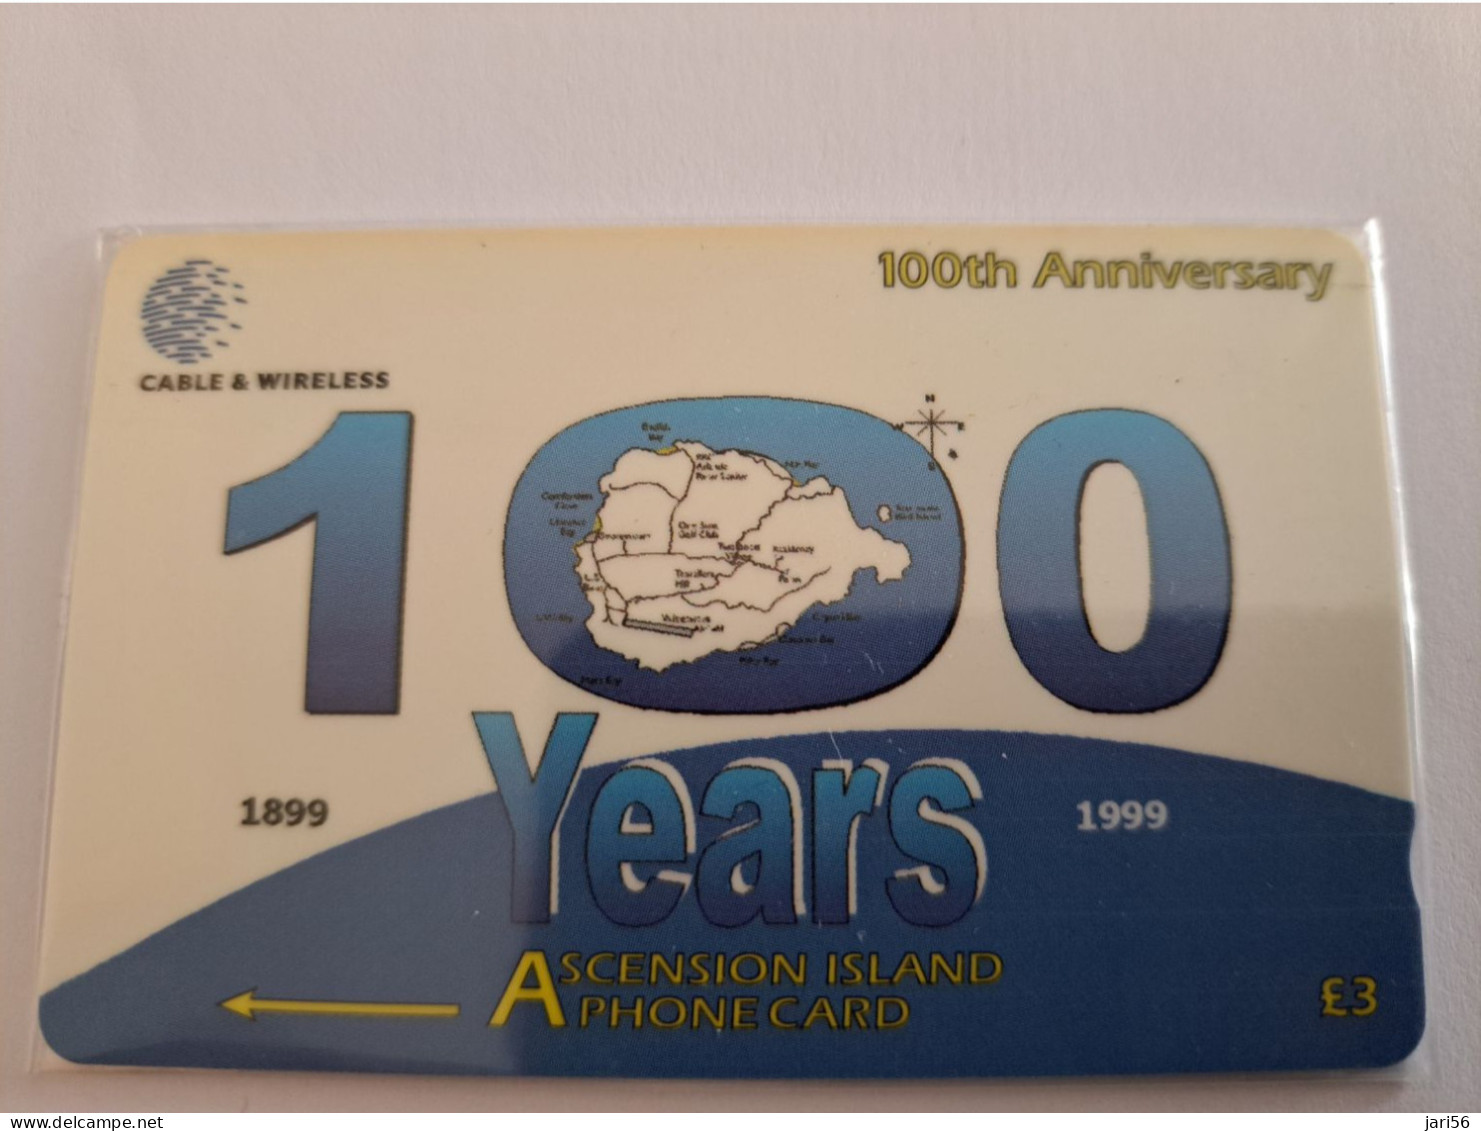 ASCENSION ISLAND   3 Pound  / 100 YEARS ANNIVERSARY /ASC-M-308A/  308CASA  MINT IN WRAPPER    NEW  Logo C&W **13663** - Isole Ascensione